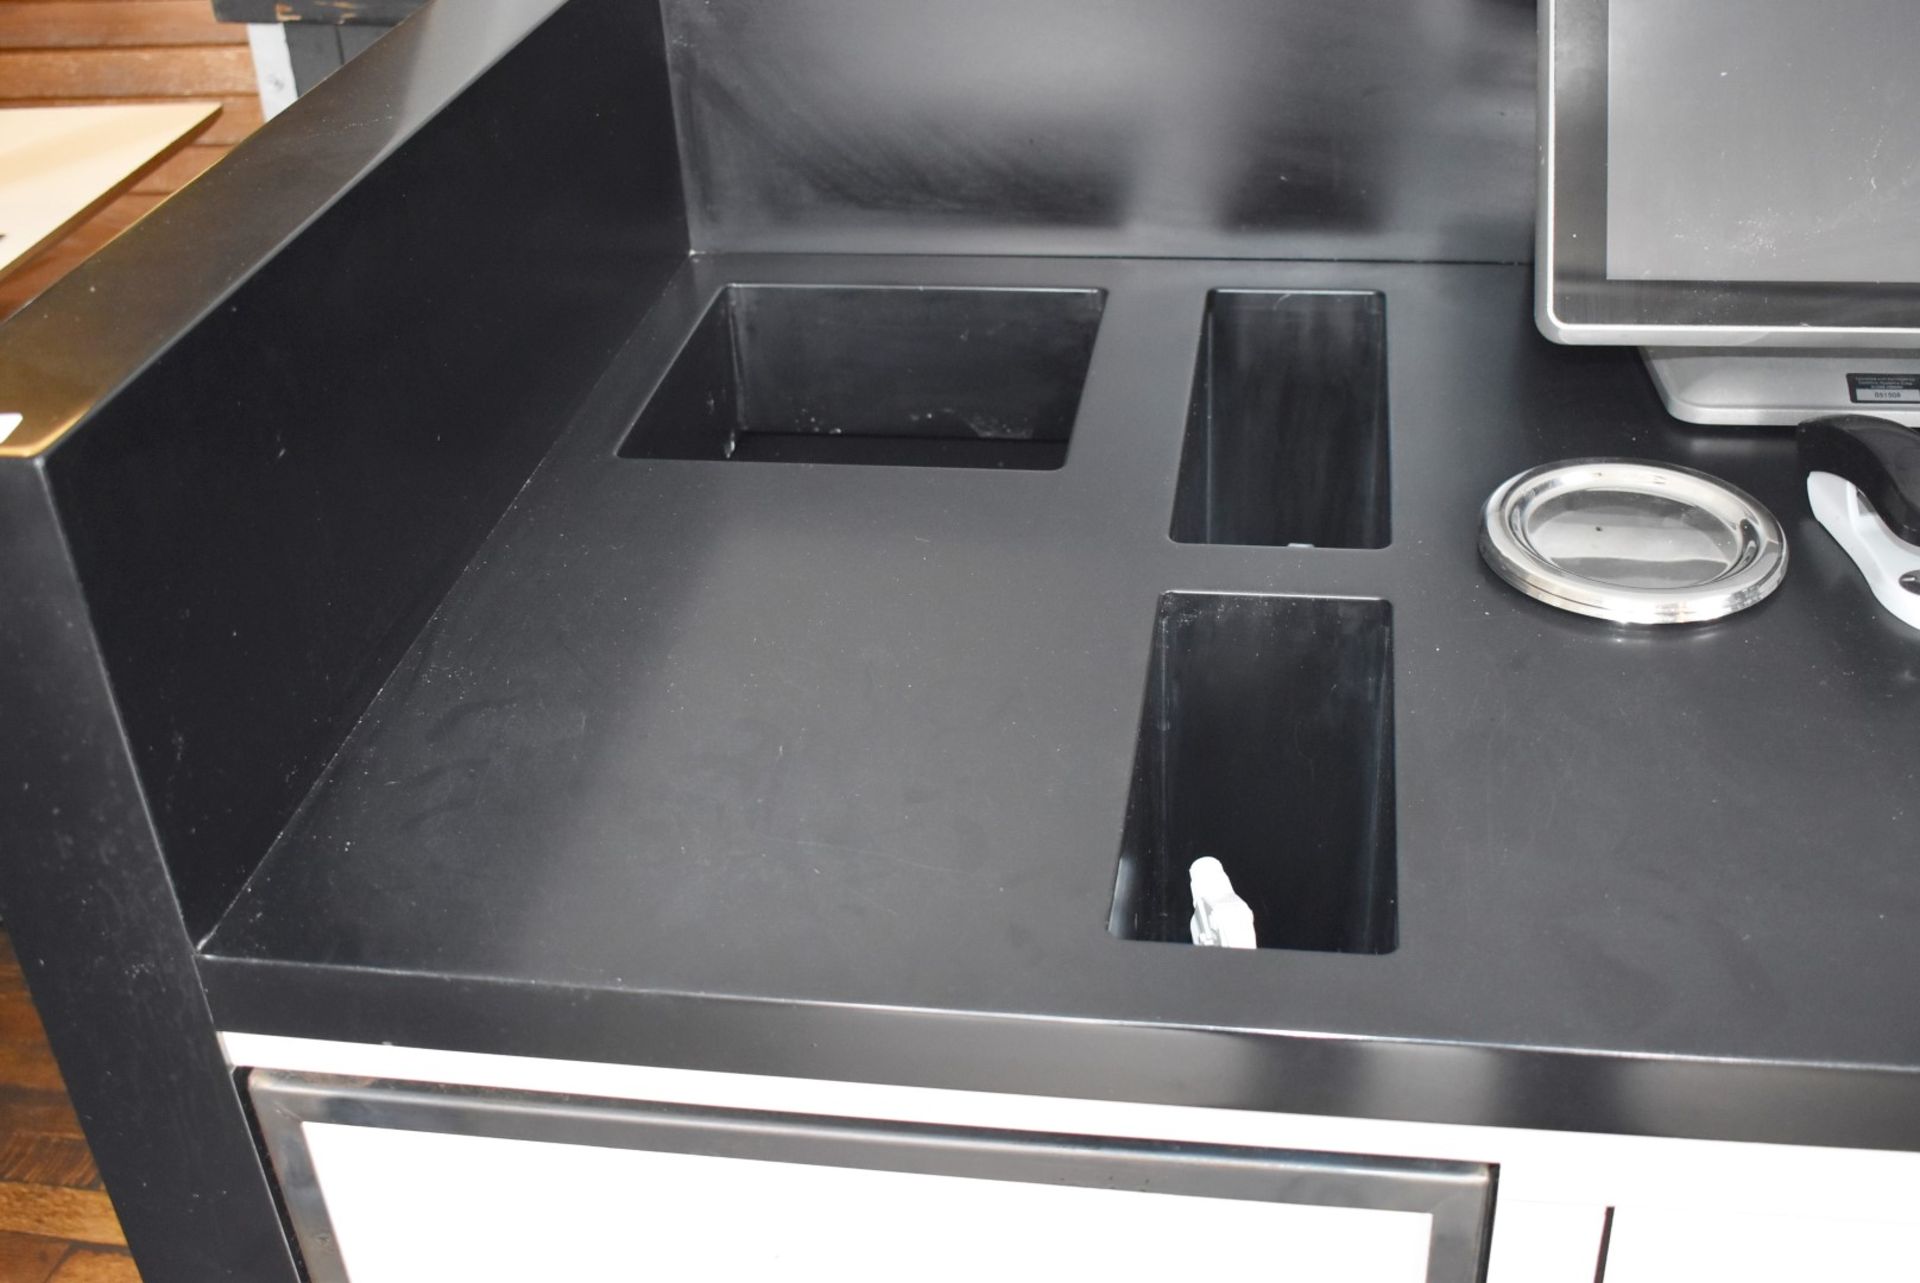 1 x Restaurant Dumbwaiter Station - Features a Solid Worksurface With Bin Chute and Storage - Image 3 of 5